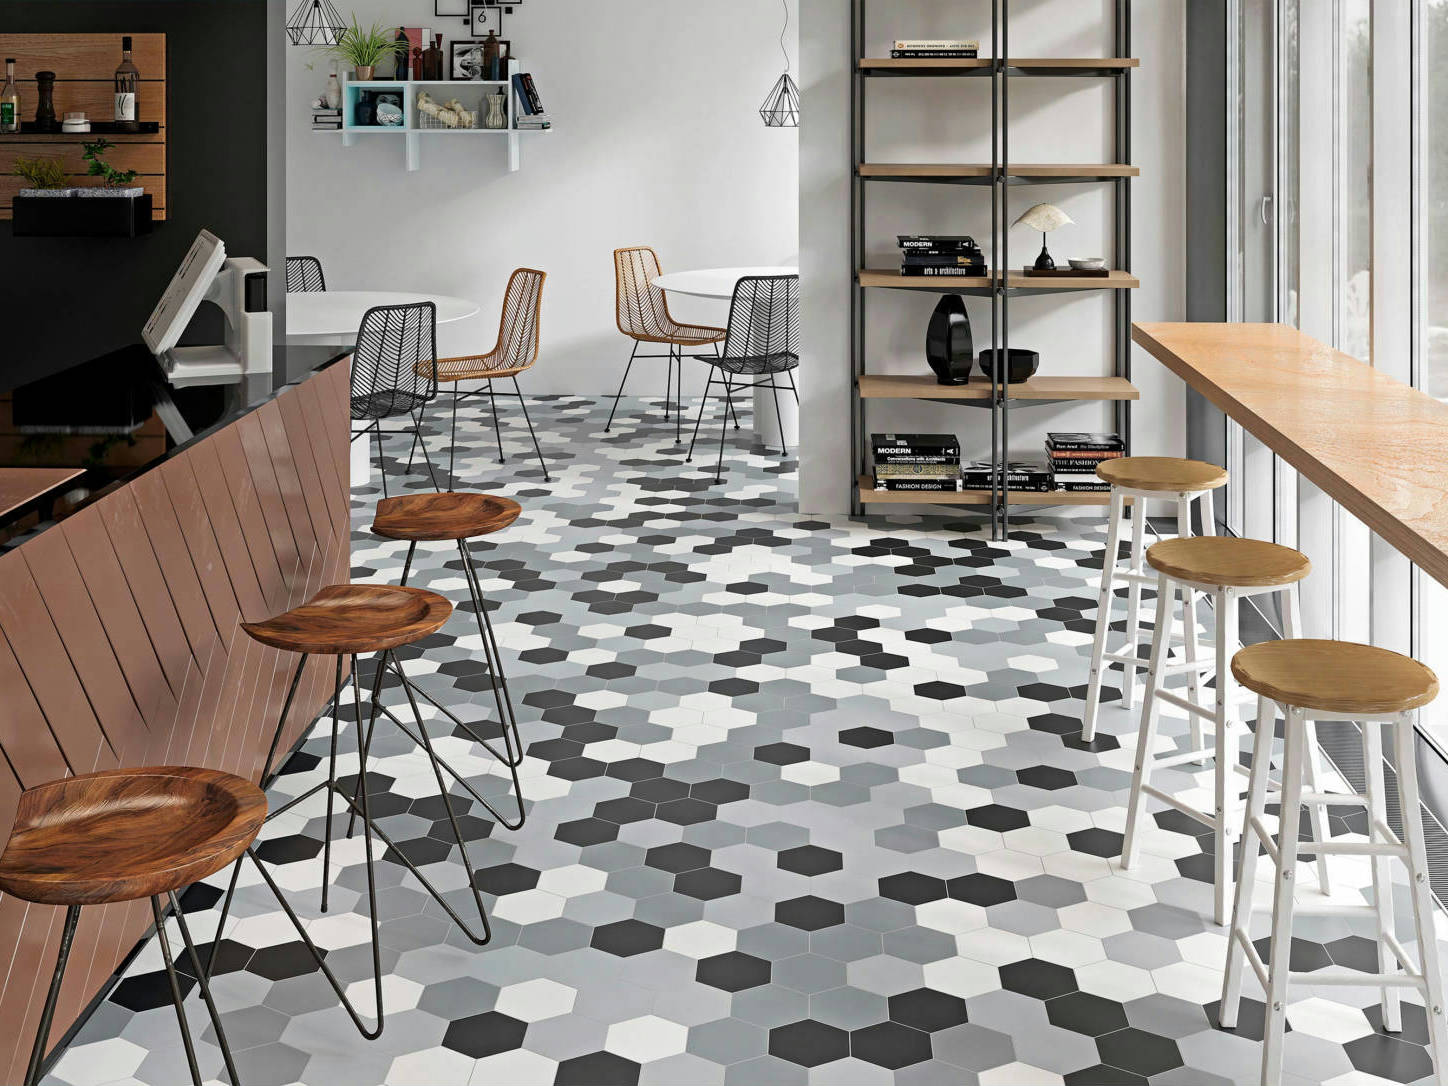 Vida 5.5X6.3” Black, Grey, Pearl, and White  Hexagons | Qualis Ceramica | Luxury Tile and Vinyl at affordable prices